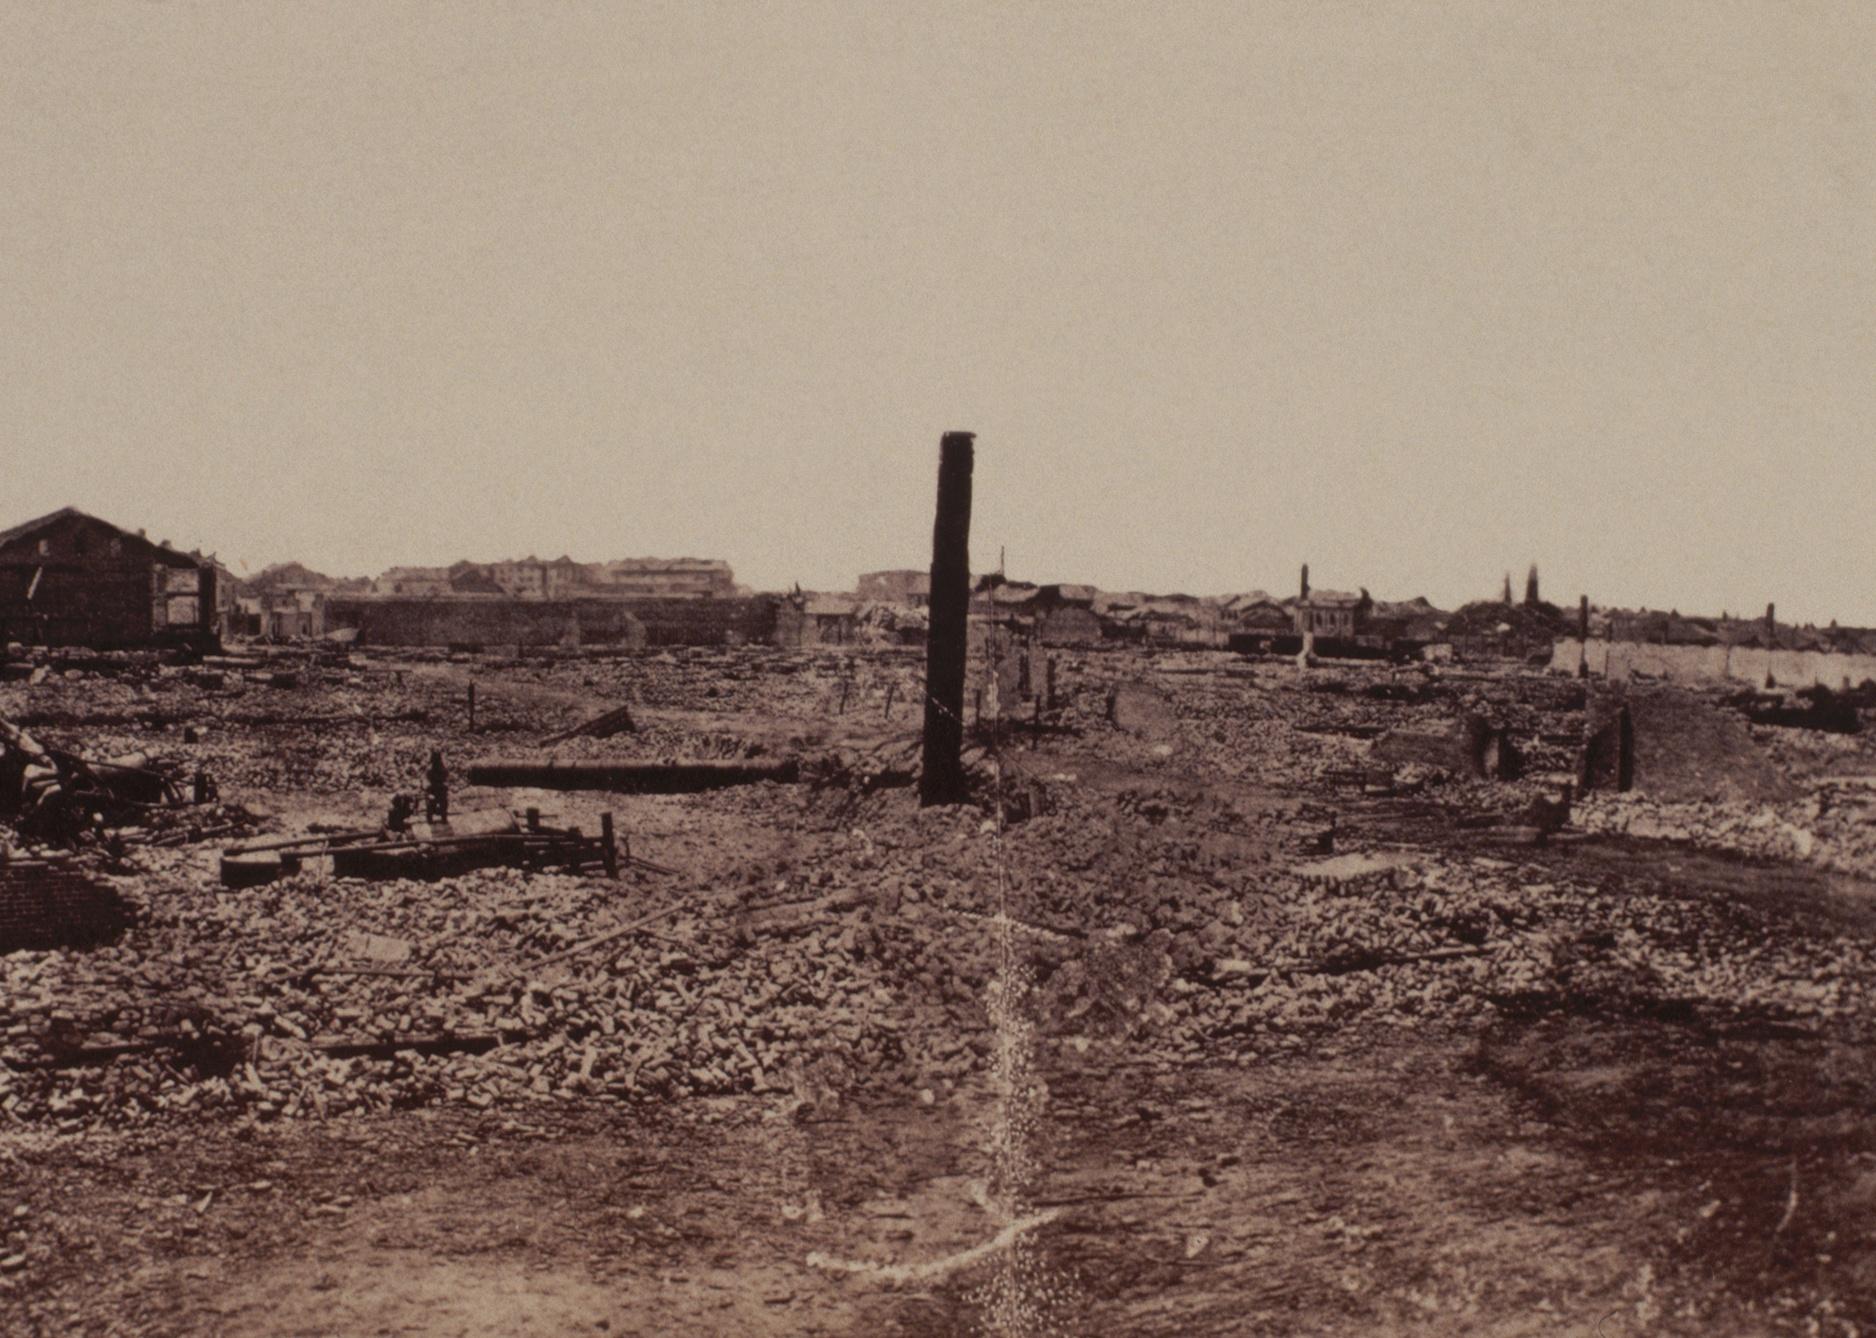 A single post remains erect amid the rubble of a Mobile warehouse.